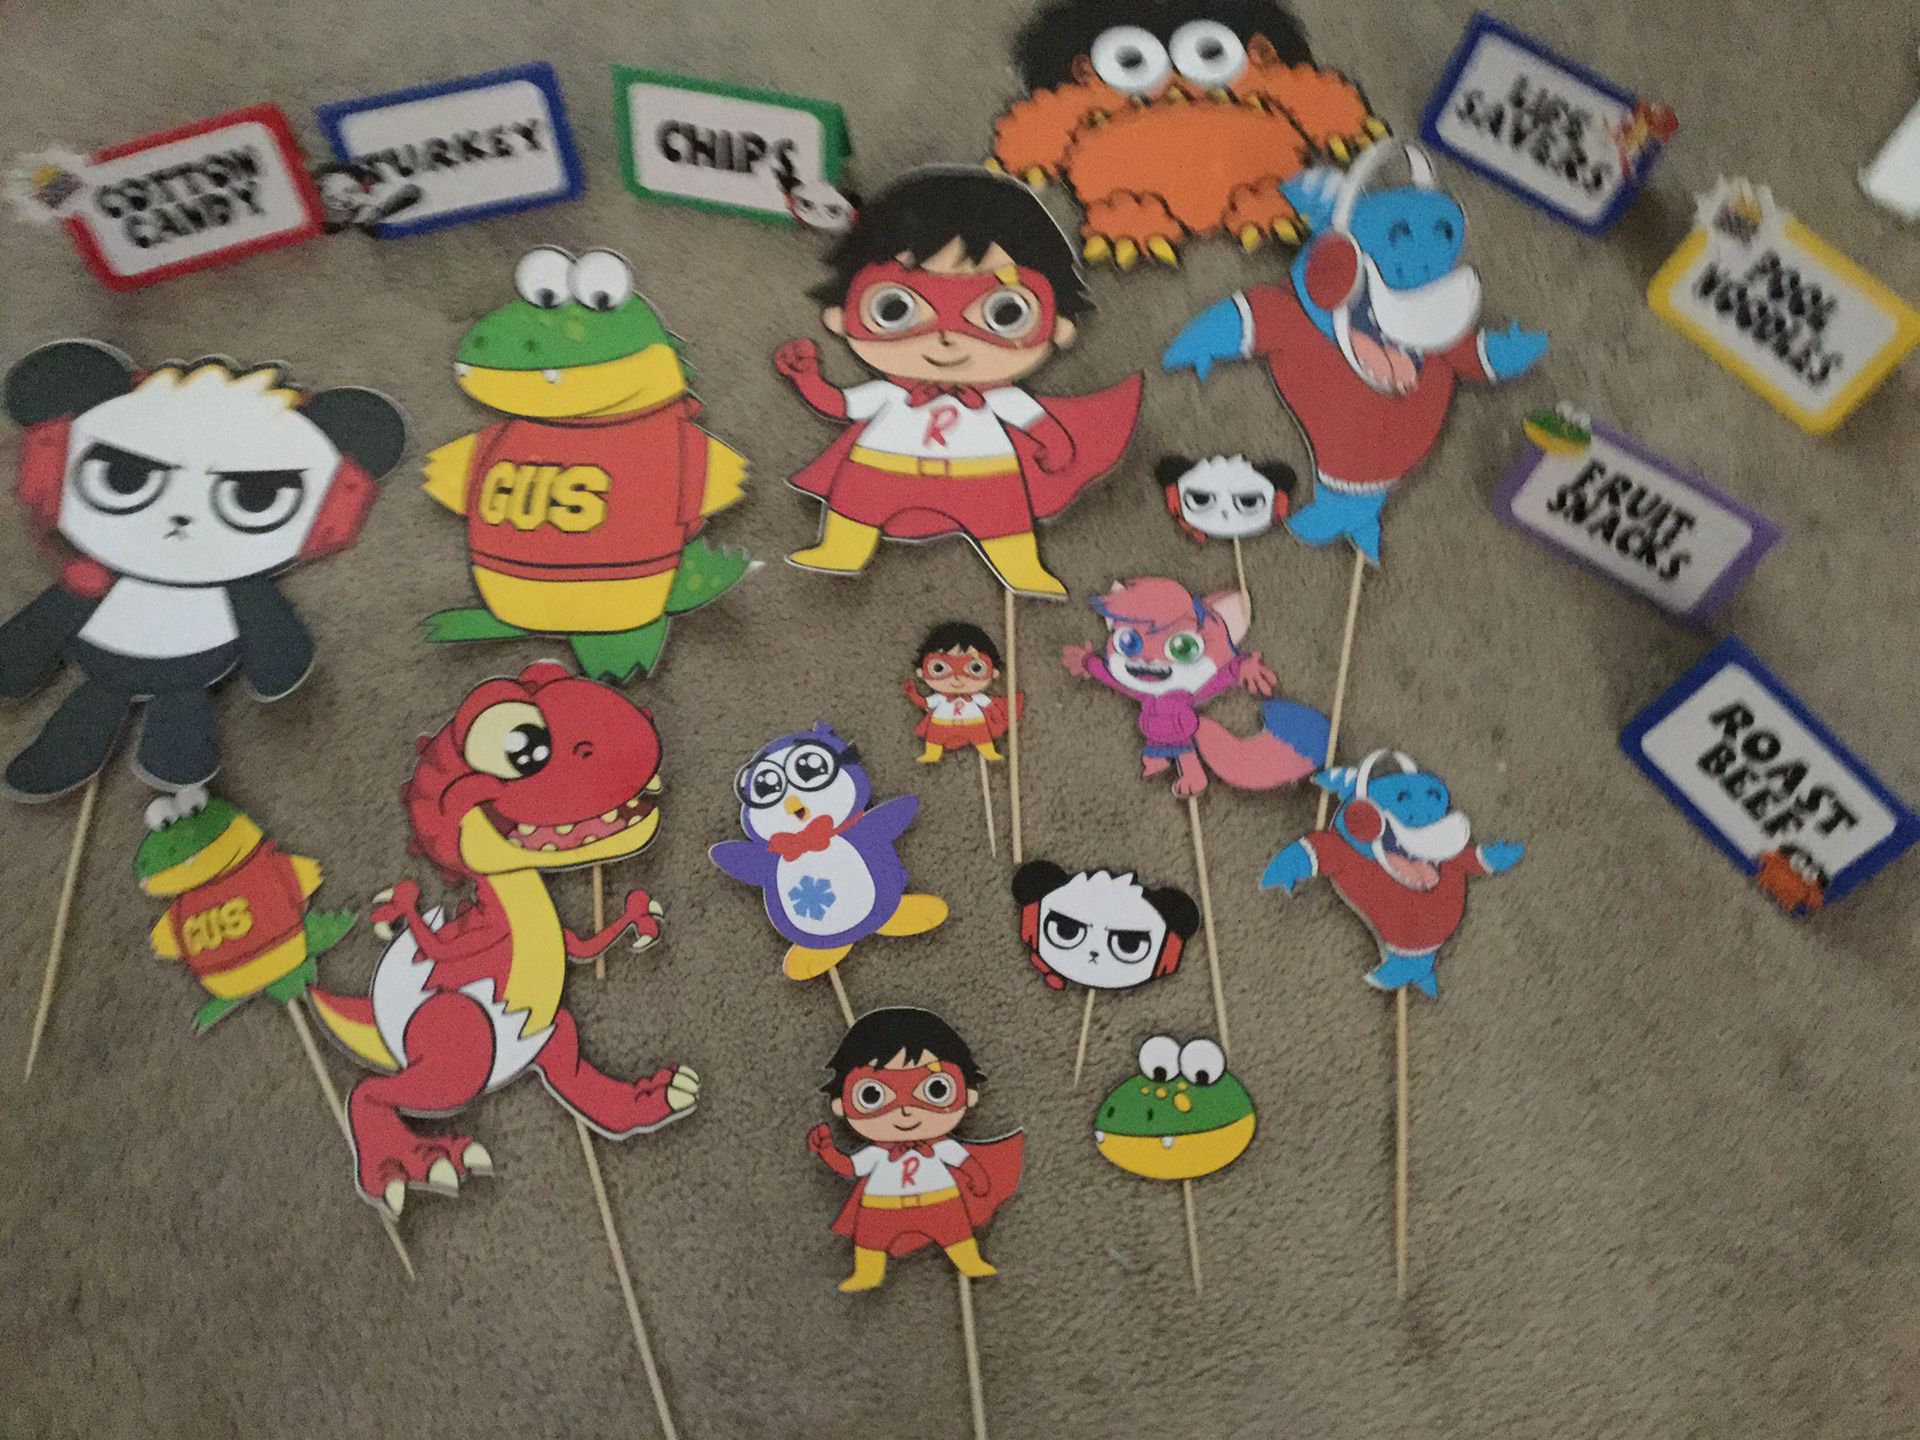 Used Ryan’s World picks food tents and cupcake toppers